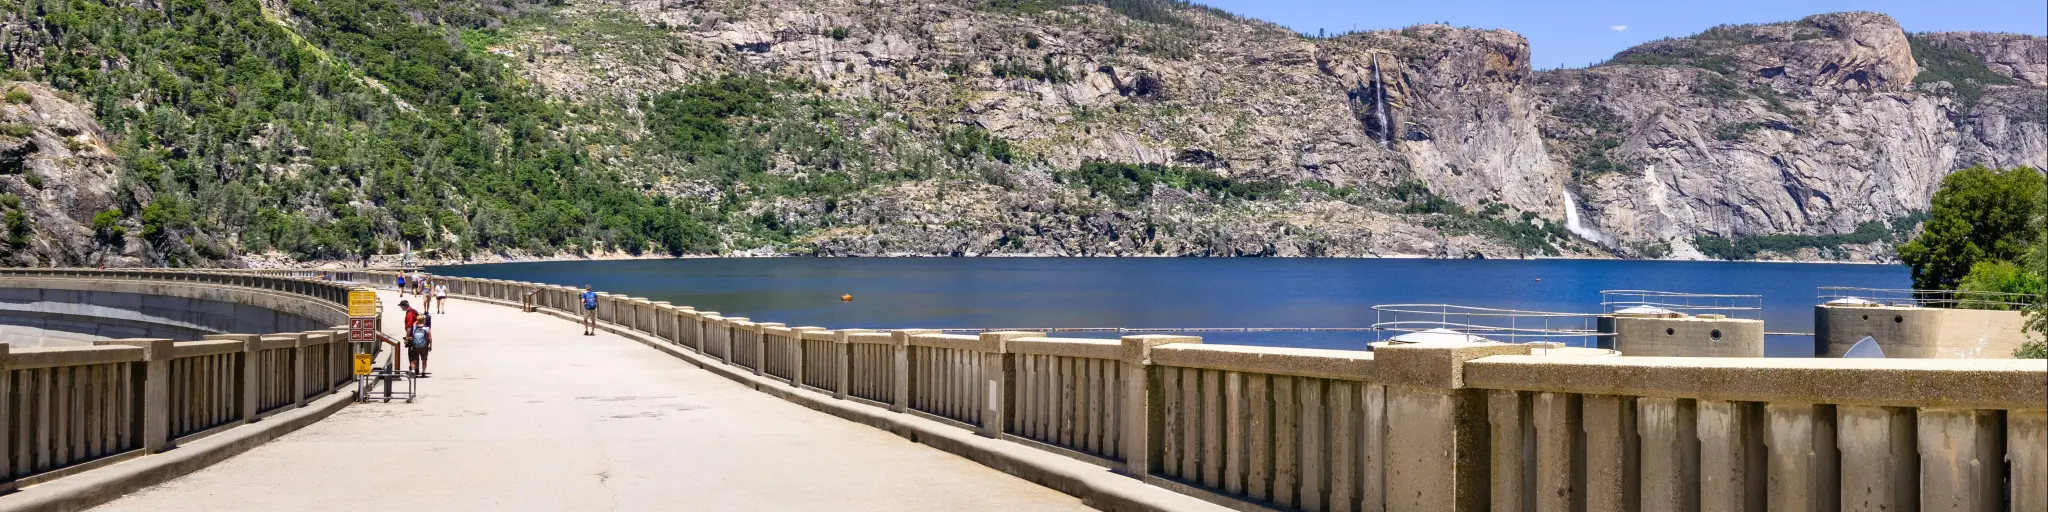 Paved road on top of O'Shaughnessy Dam and Hetch Hetchy Reservoir visible on the right